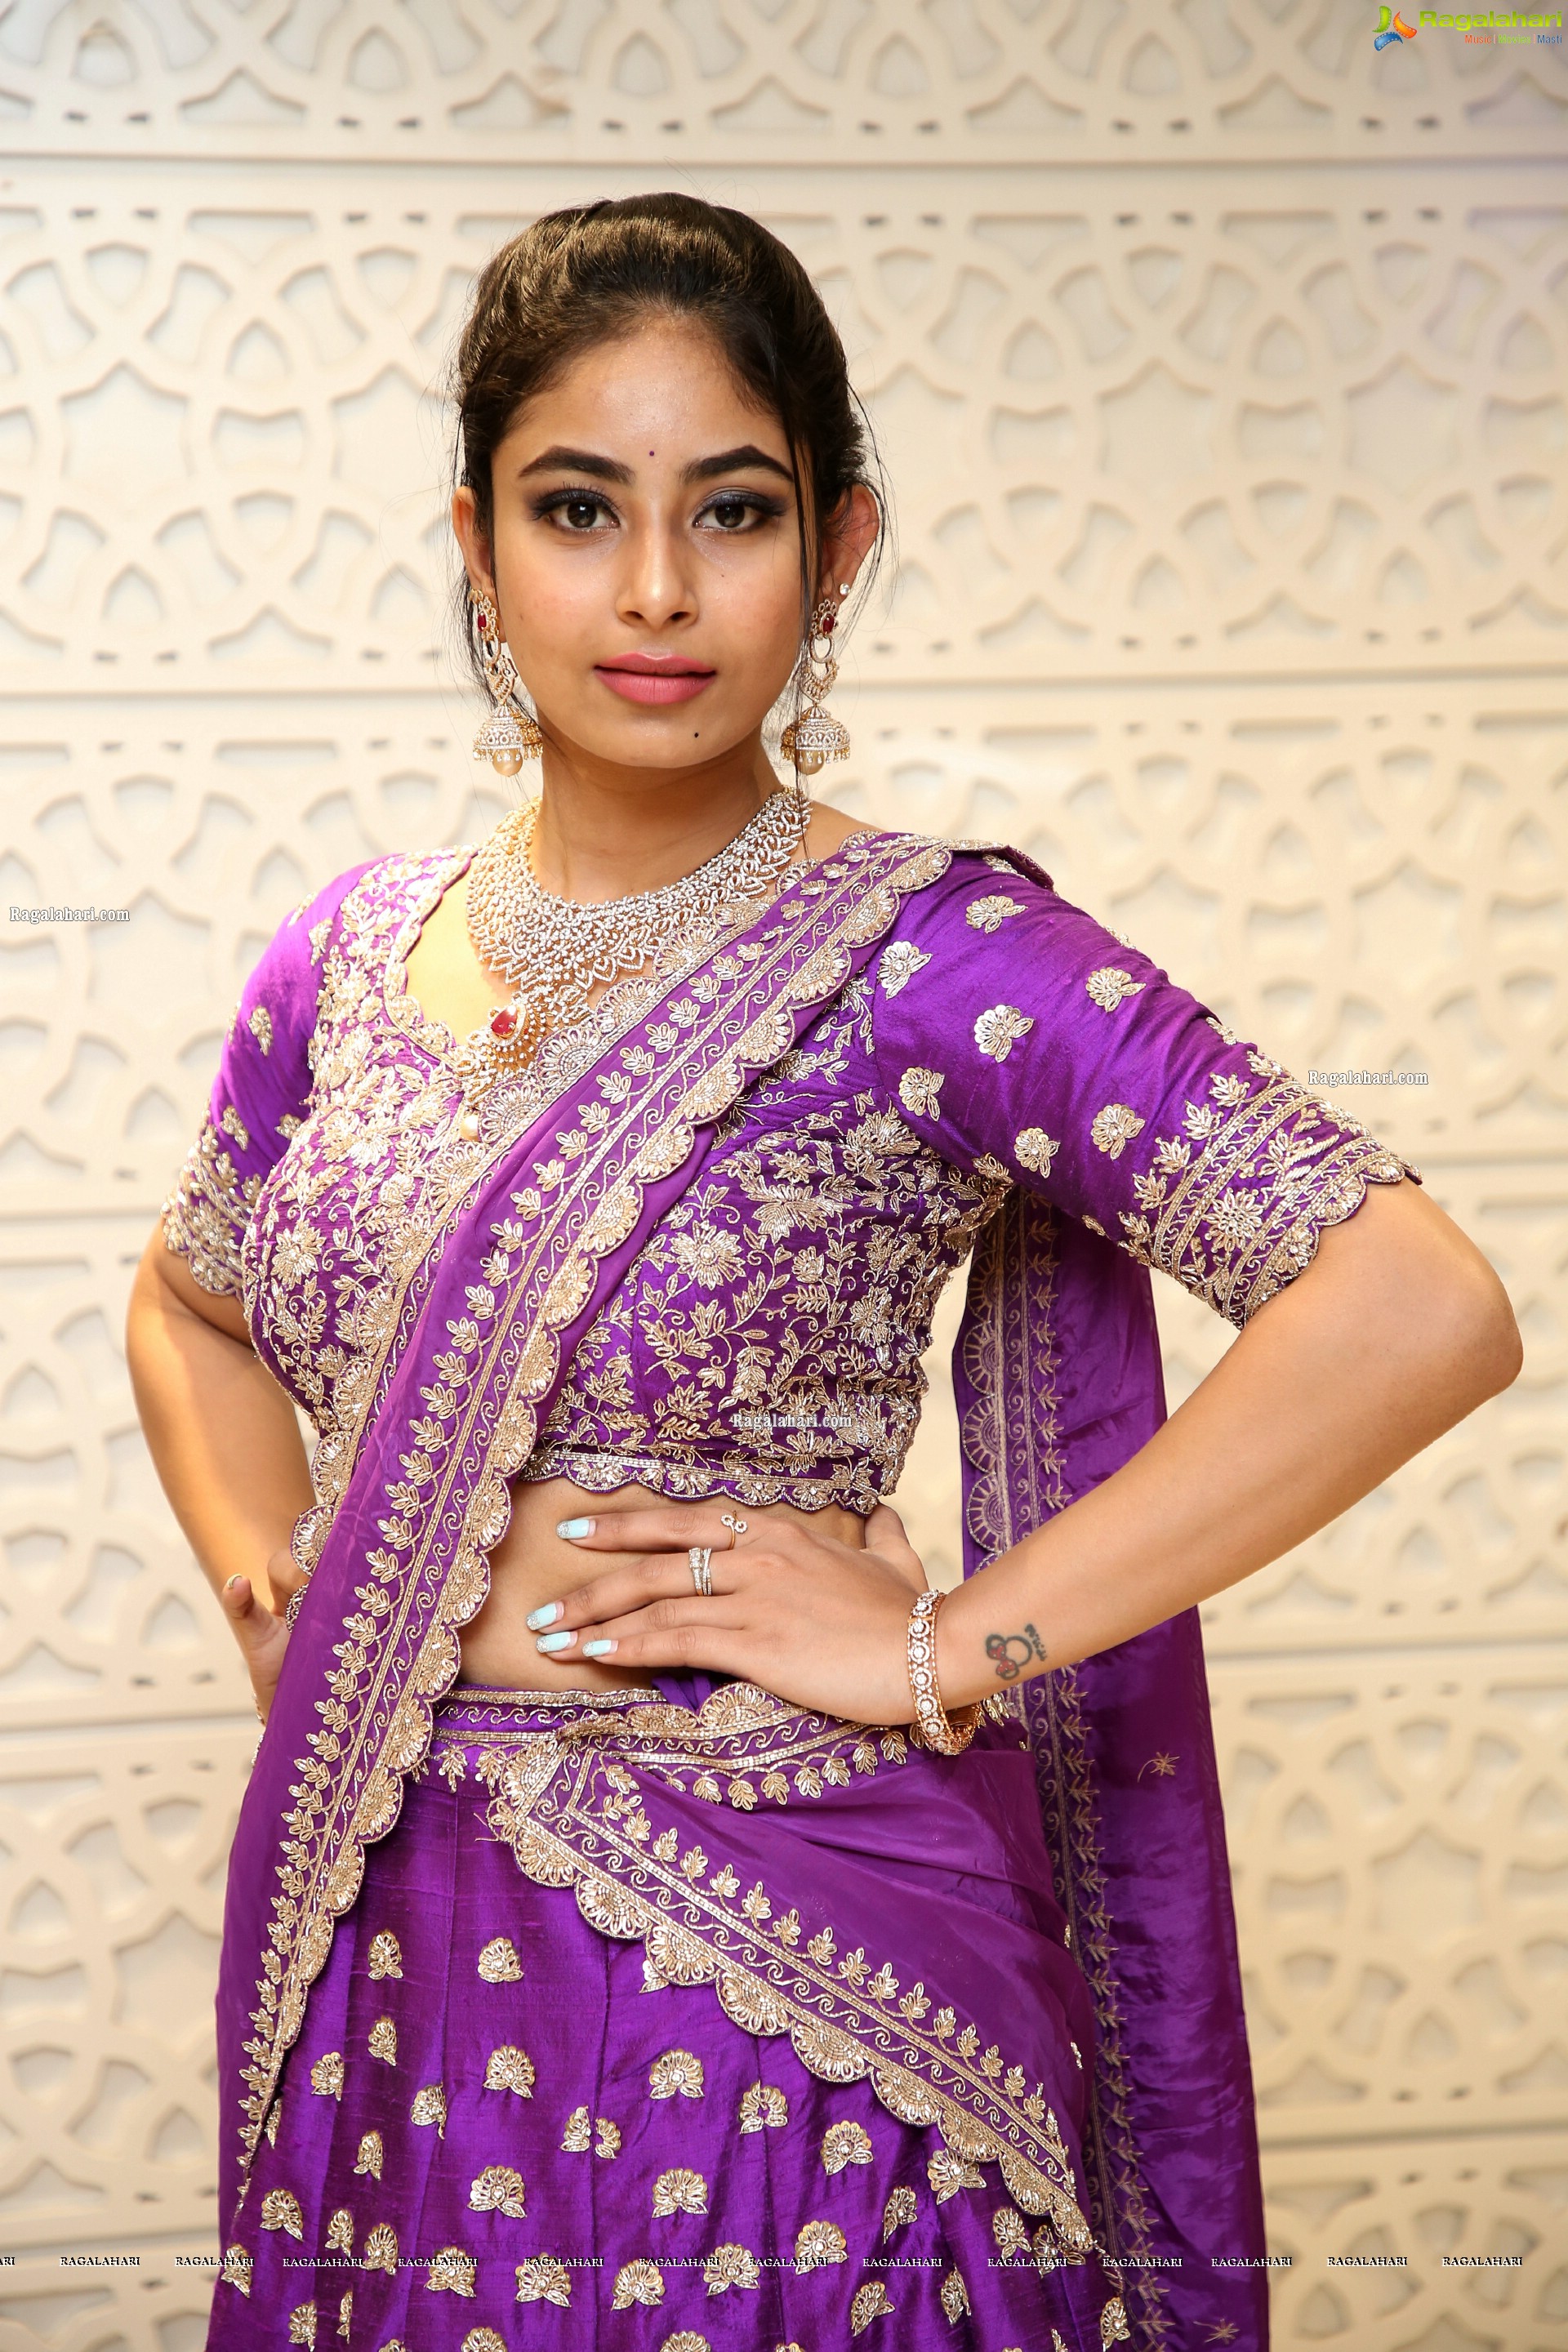 Honey Chowdary in Traditional Jewellery, HD Photo Gallery